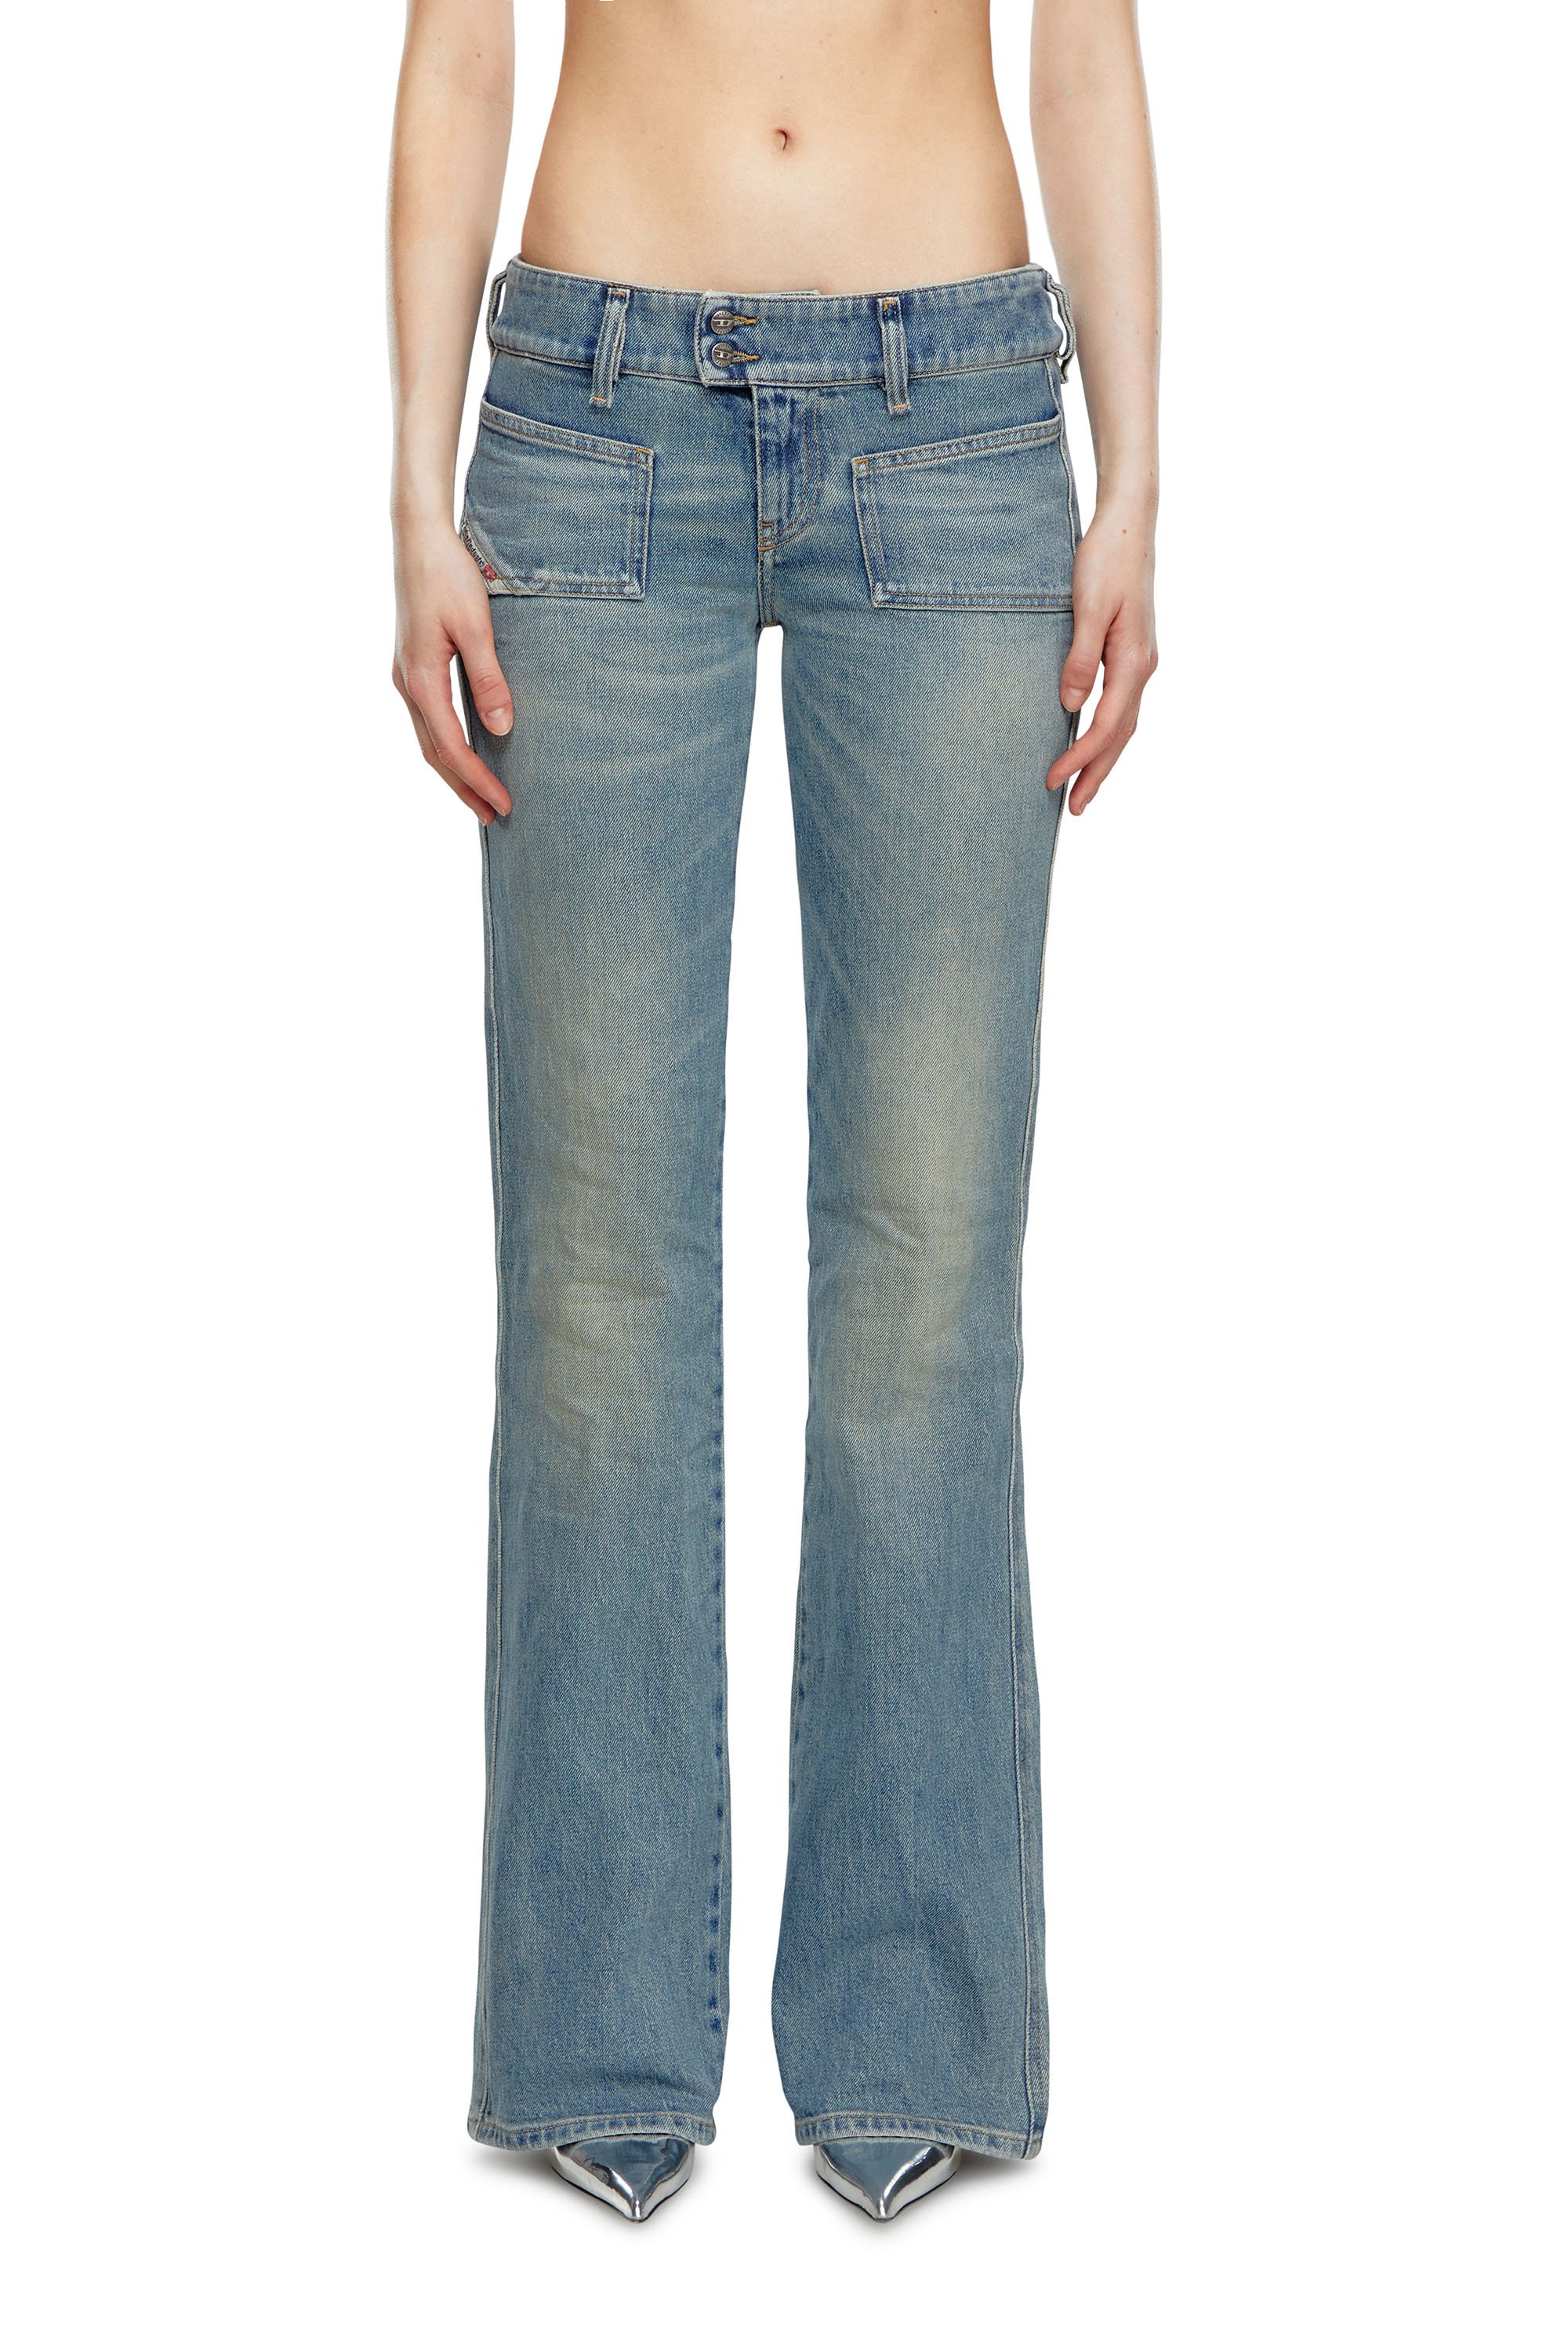 Diesel - Bootcut and Flare Jeans D-Hush 09J55, Mujer Bootcut y Flare Jeans - D-Hush in Azul marino - Image 2